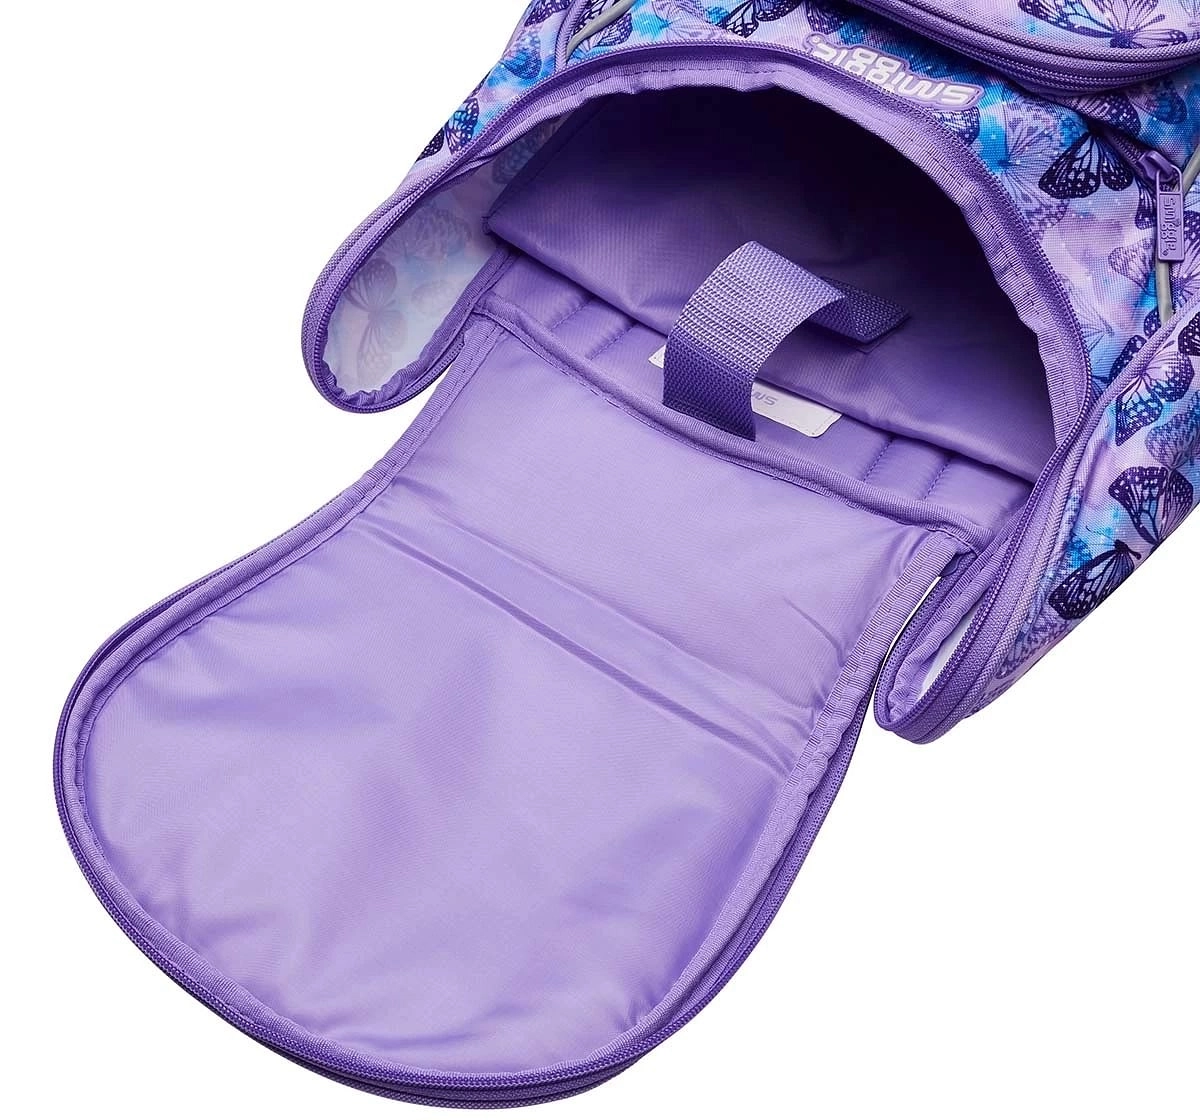 Smiggle Mirage Collection Backpack, Classic Purple, 4Y+